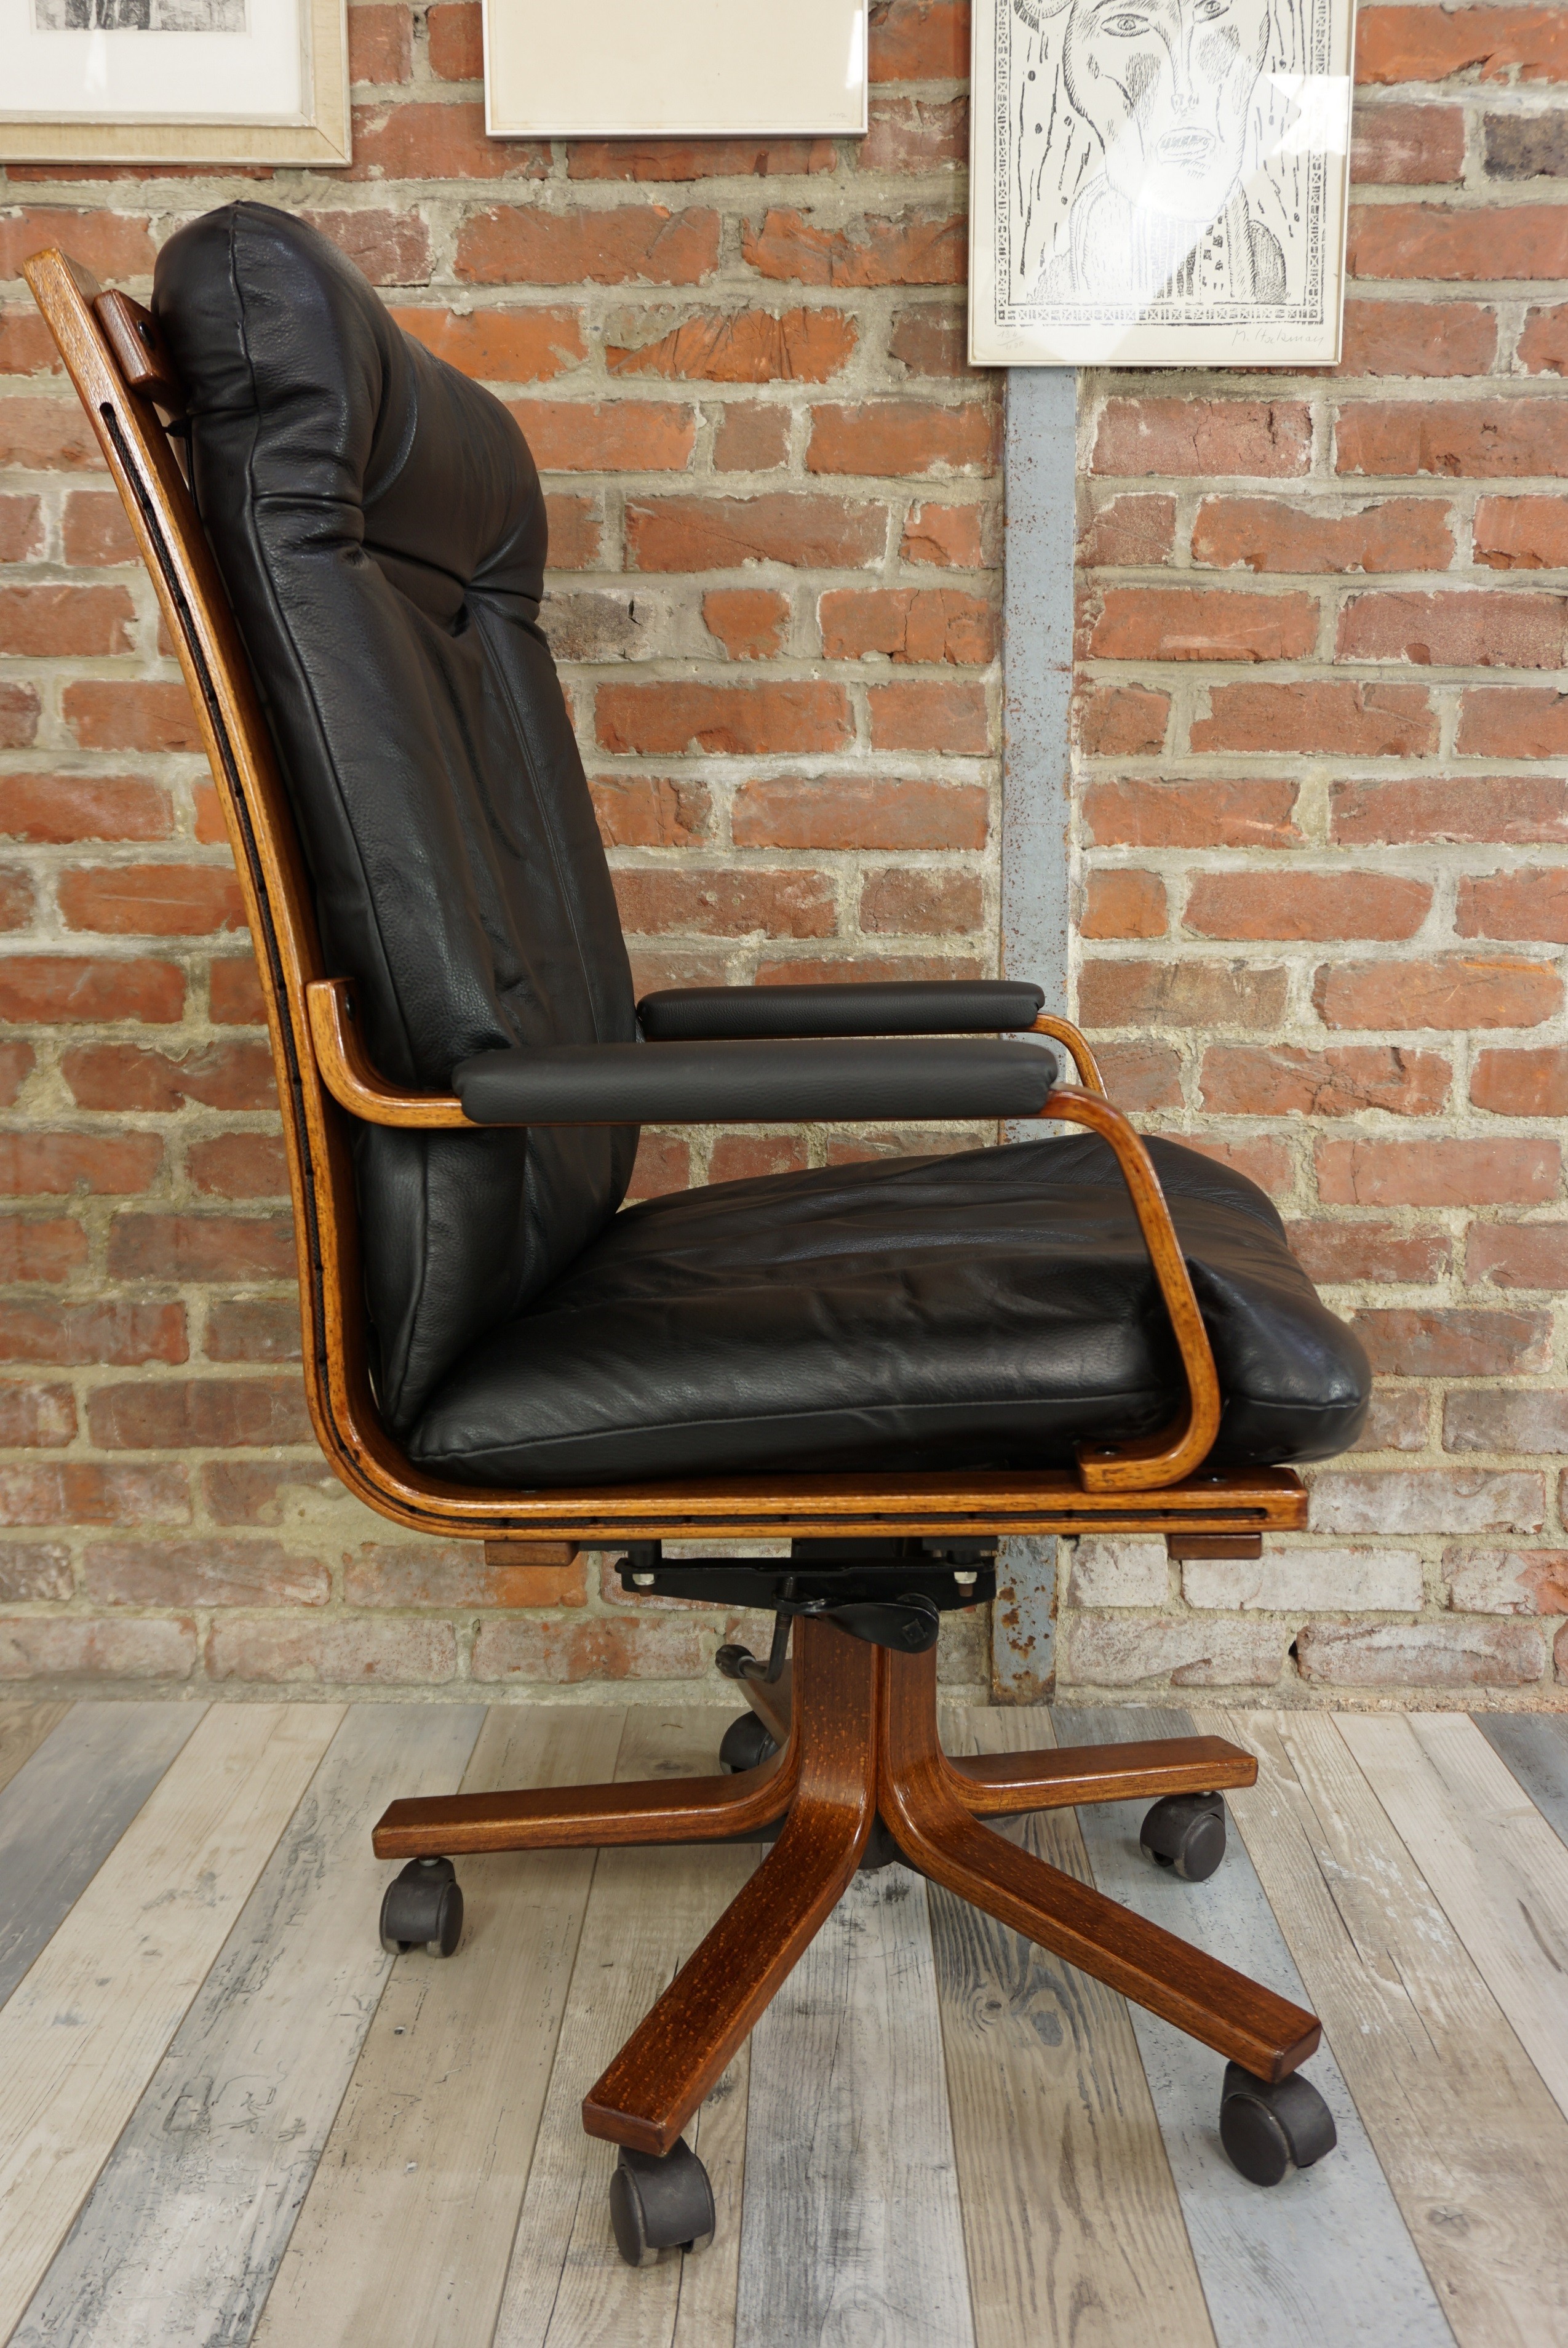 Vintage swivelling office chair in wood and leather - 1970s - Design Market